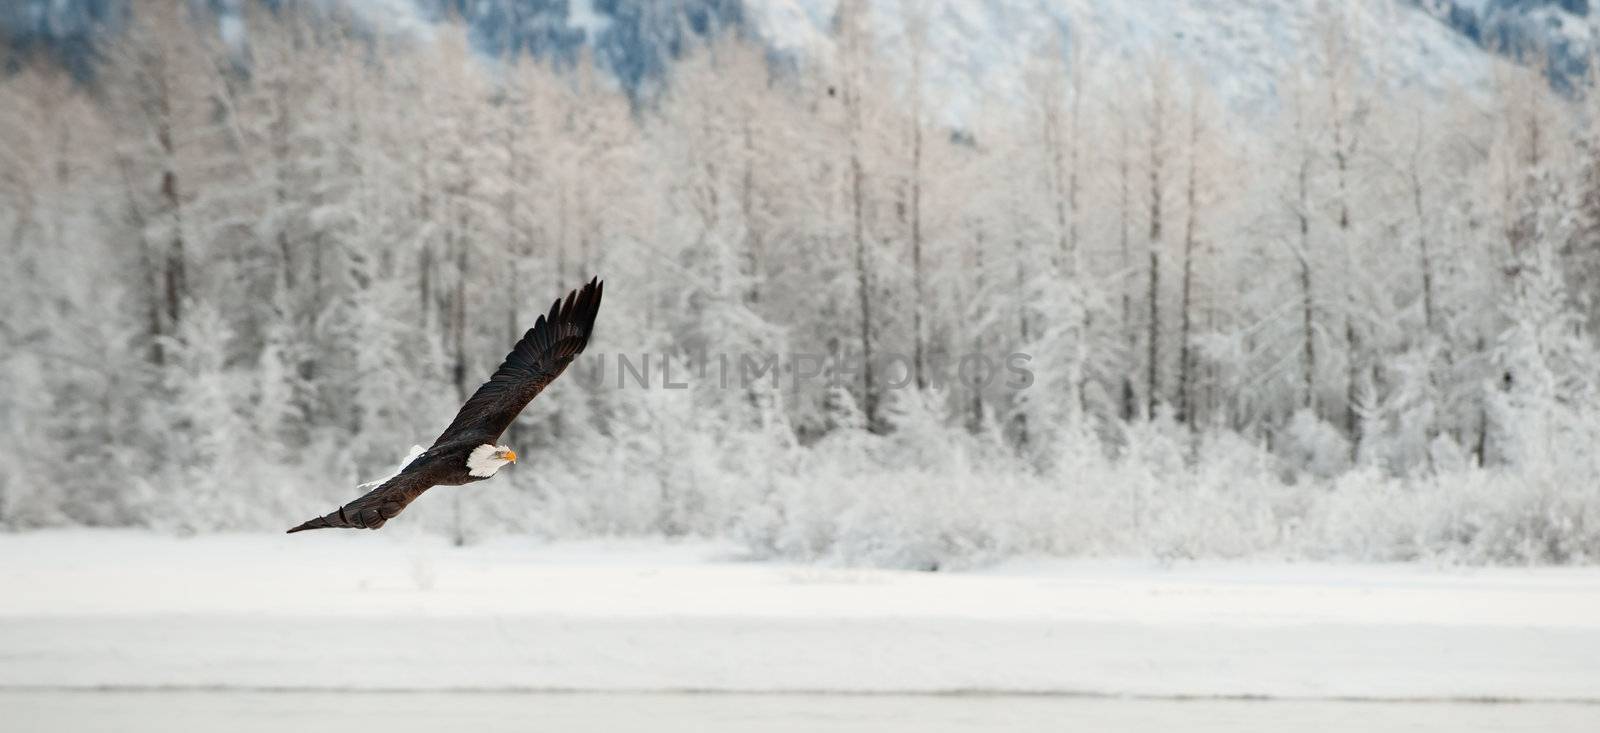 Flying Bald eagle. by SURZ